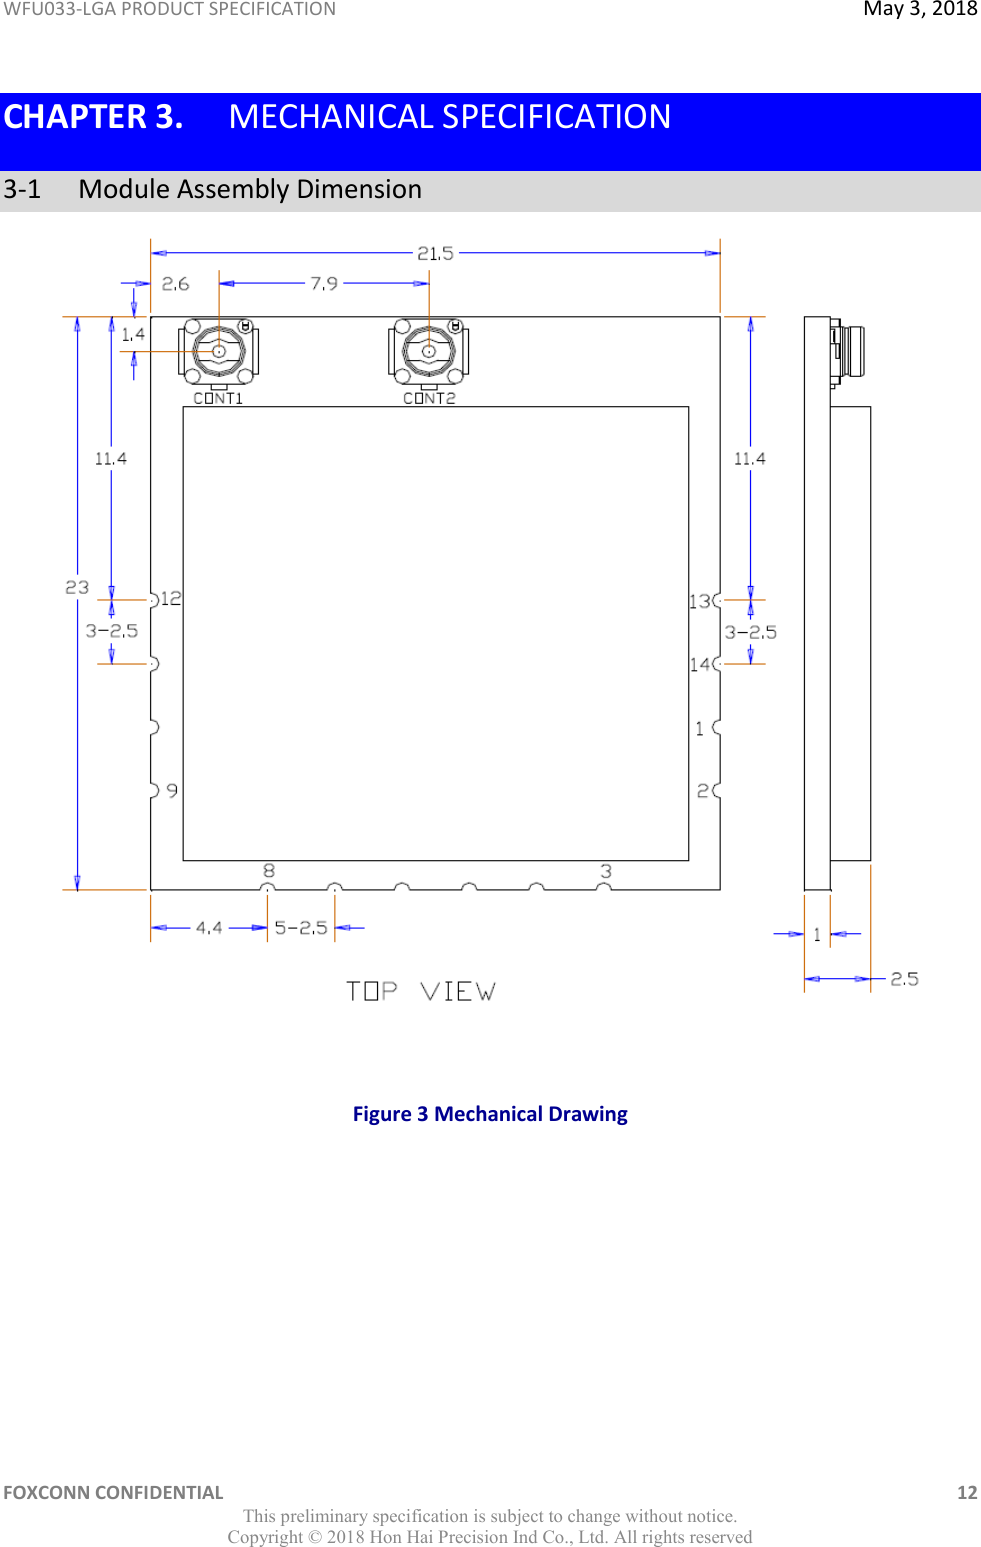 WFU033-LGA PRODUCT SPECIFICATION  May 3, 2018 FOXCONN CONFIDENTIAL    12 This preliminary specification is subject to change without notice. Copyright ©  2018 Hon Hai Precision Ind Co., Ltd. All rights reserved CHAPTER 3. MECHANICAL SPECIFICATION 3-1   Module Assembly Dimension   Figure 3 Mechanical Drawing     